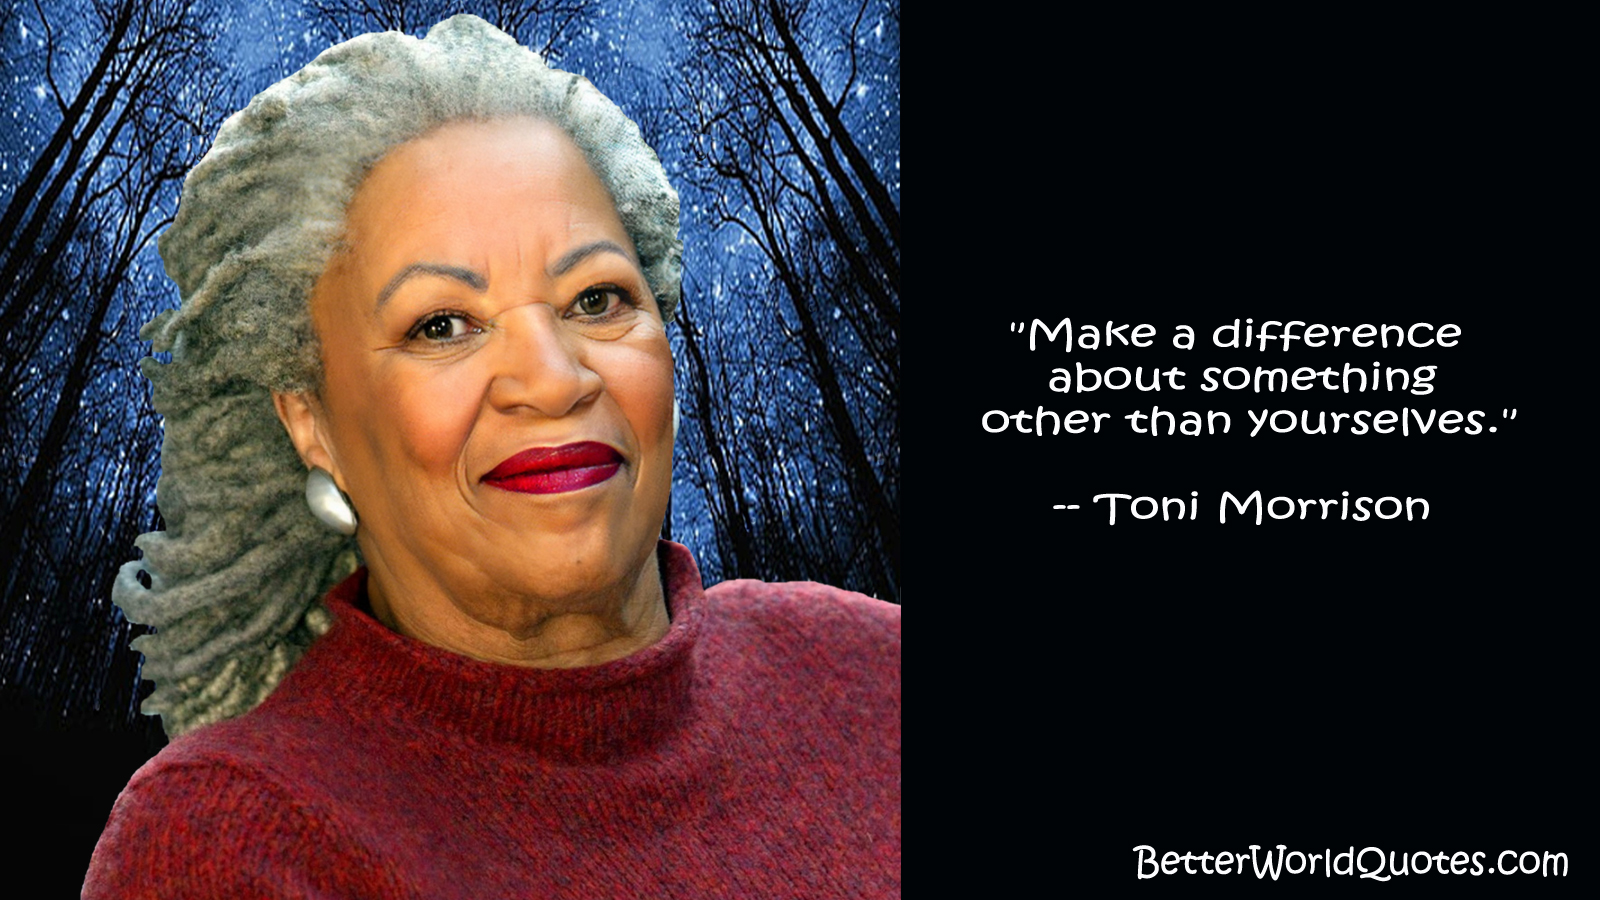 Toni Morrison: Make a difference about something other than yourselves.